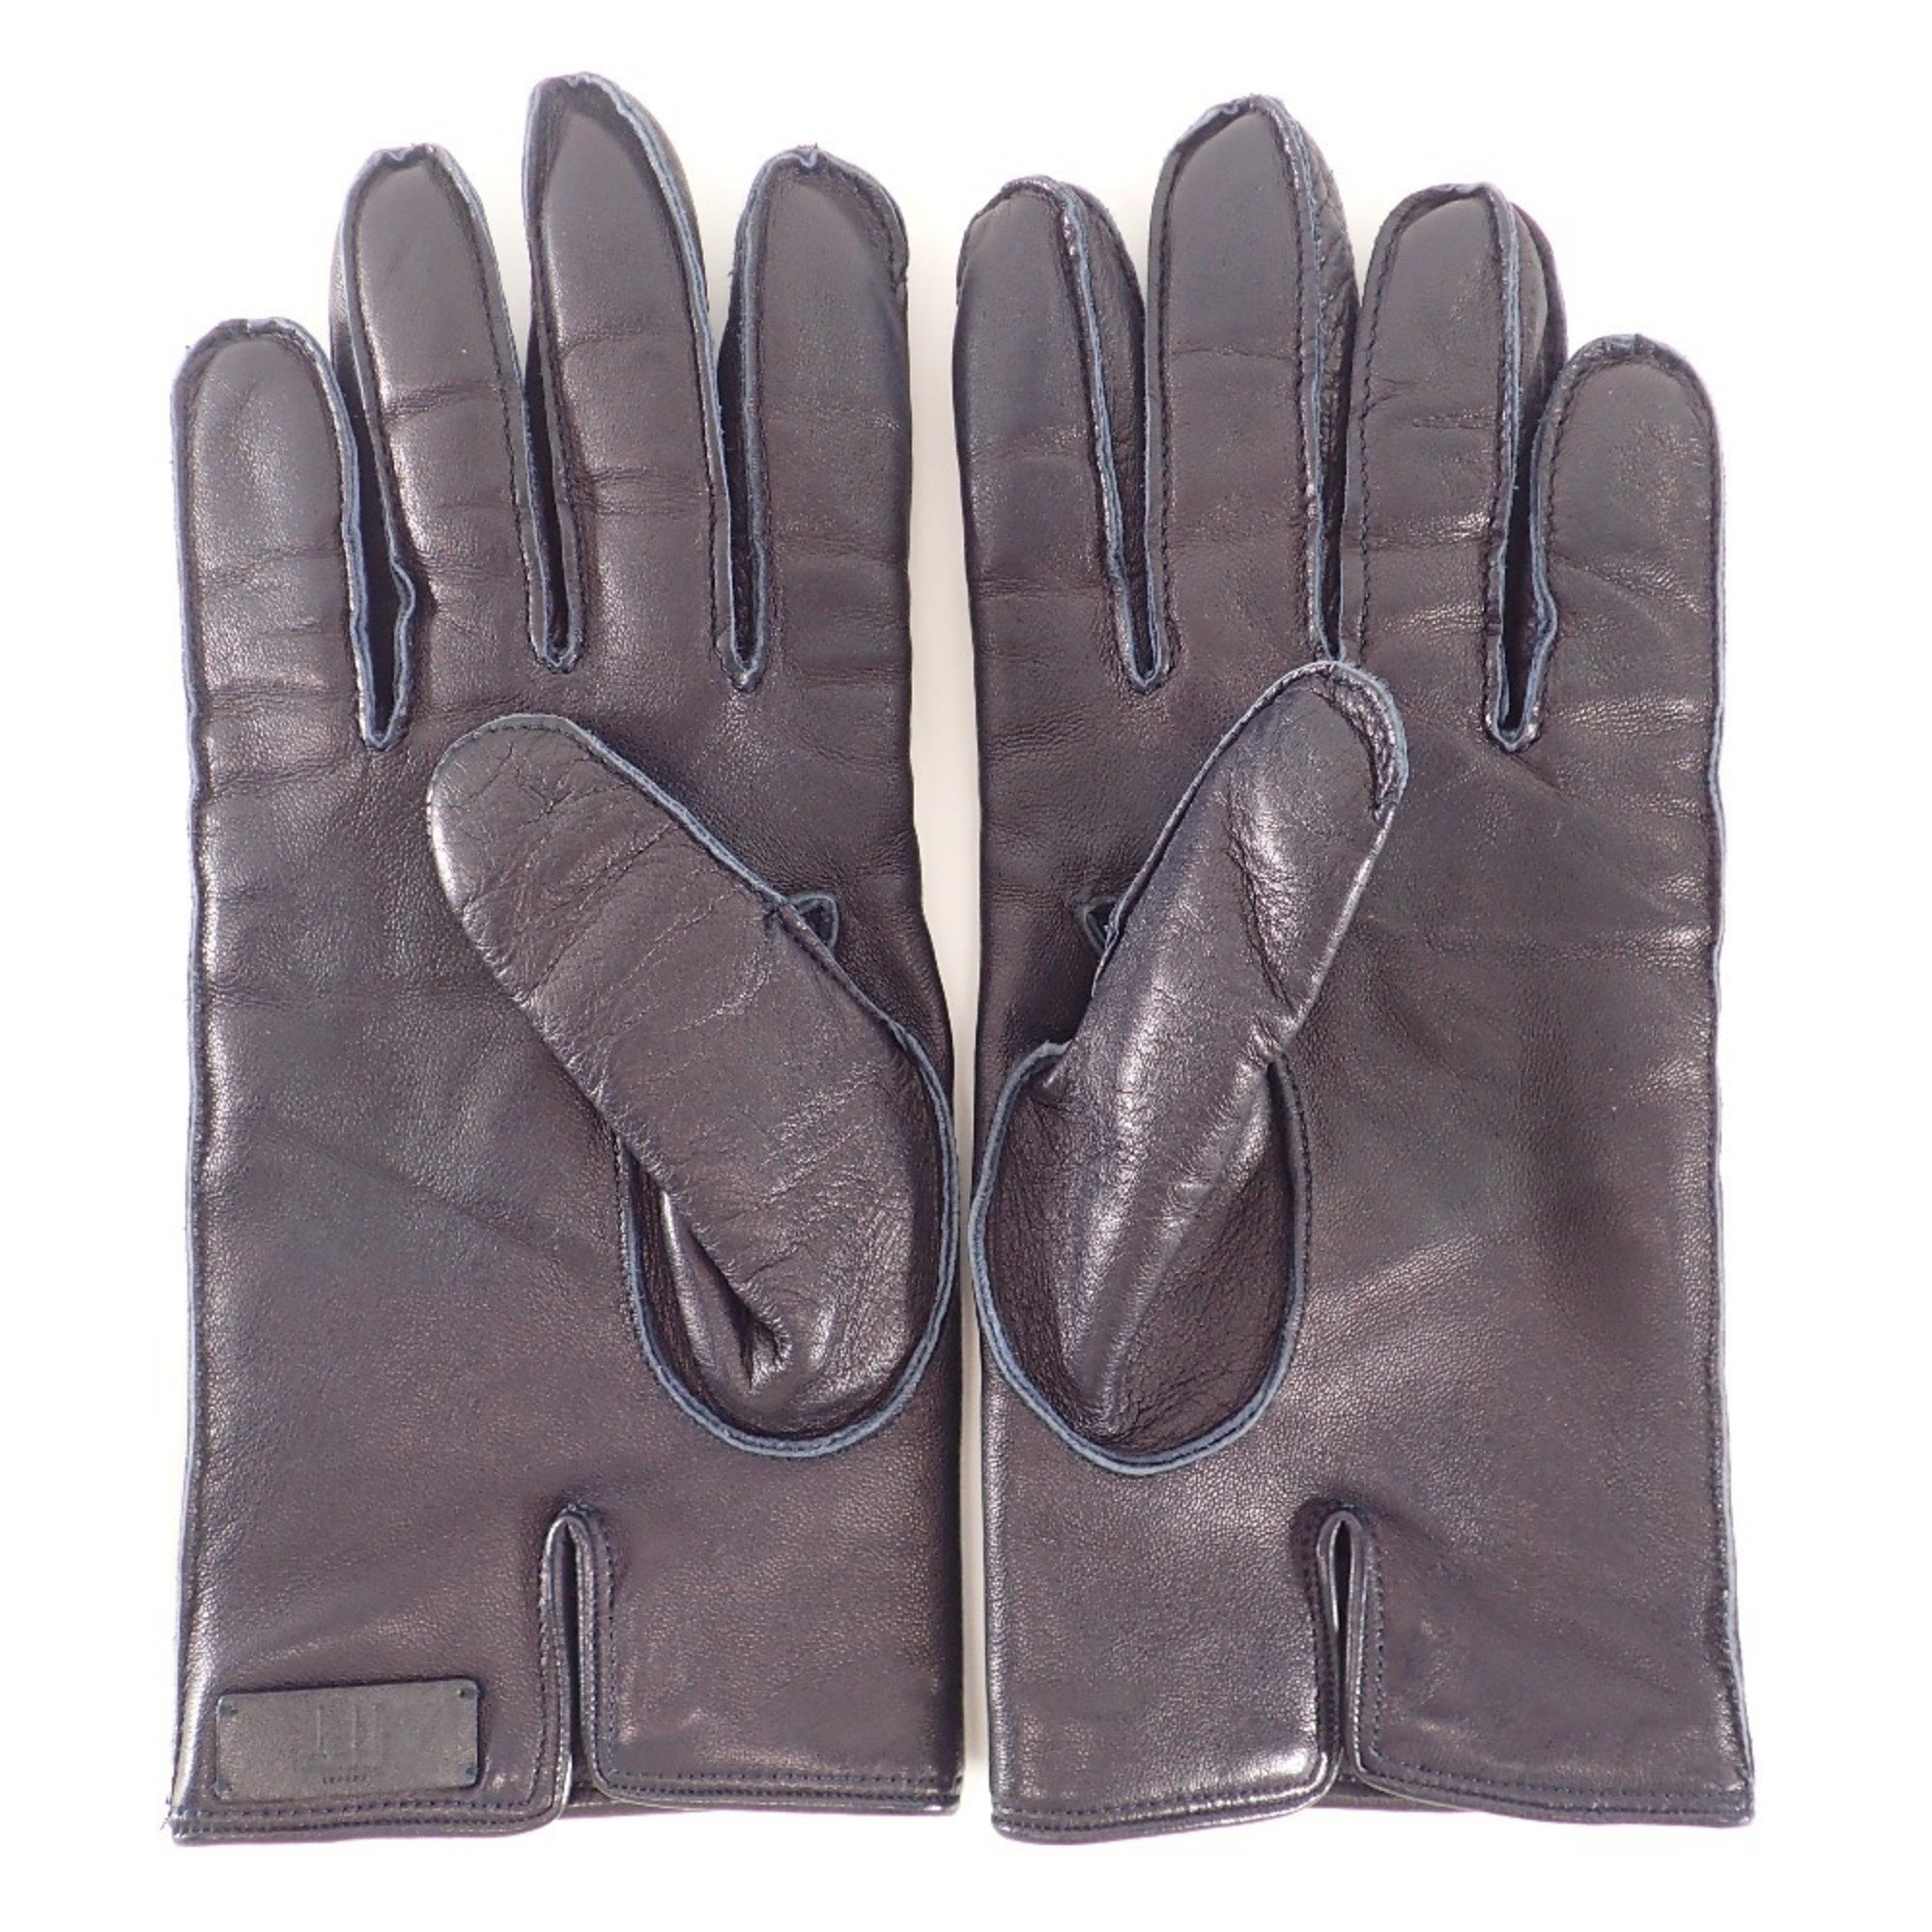 Dunhill Lamb Leather Cashmere Lining Gloves 8.5 Navy Men's